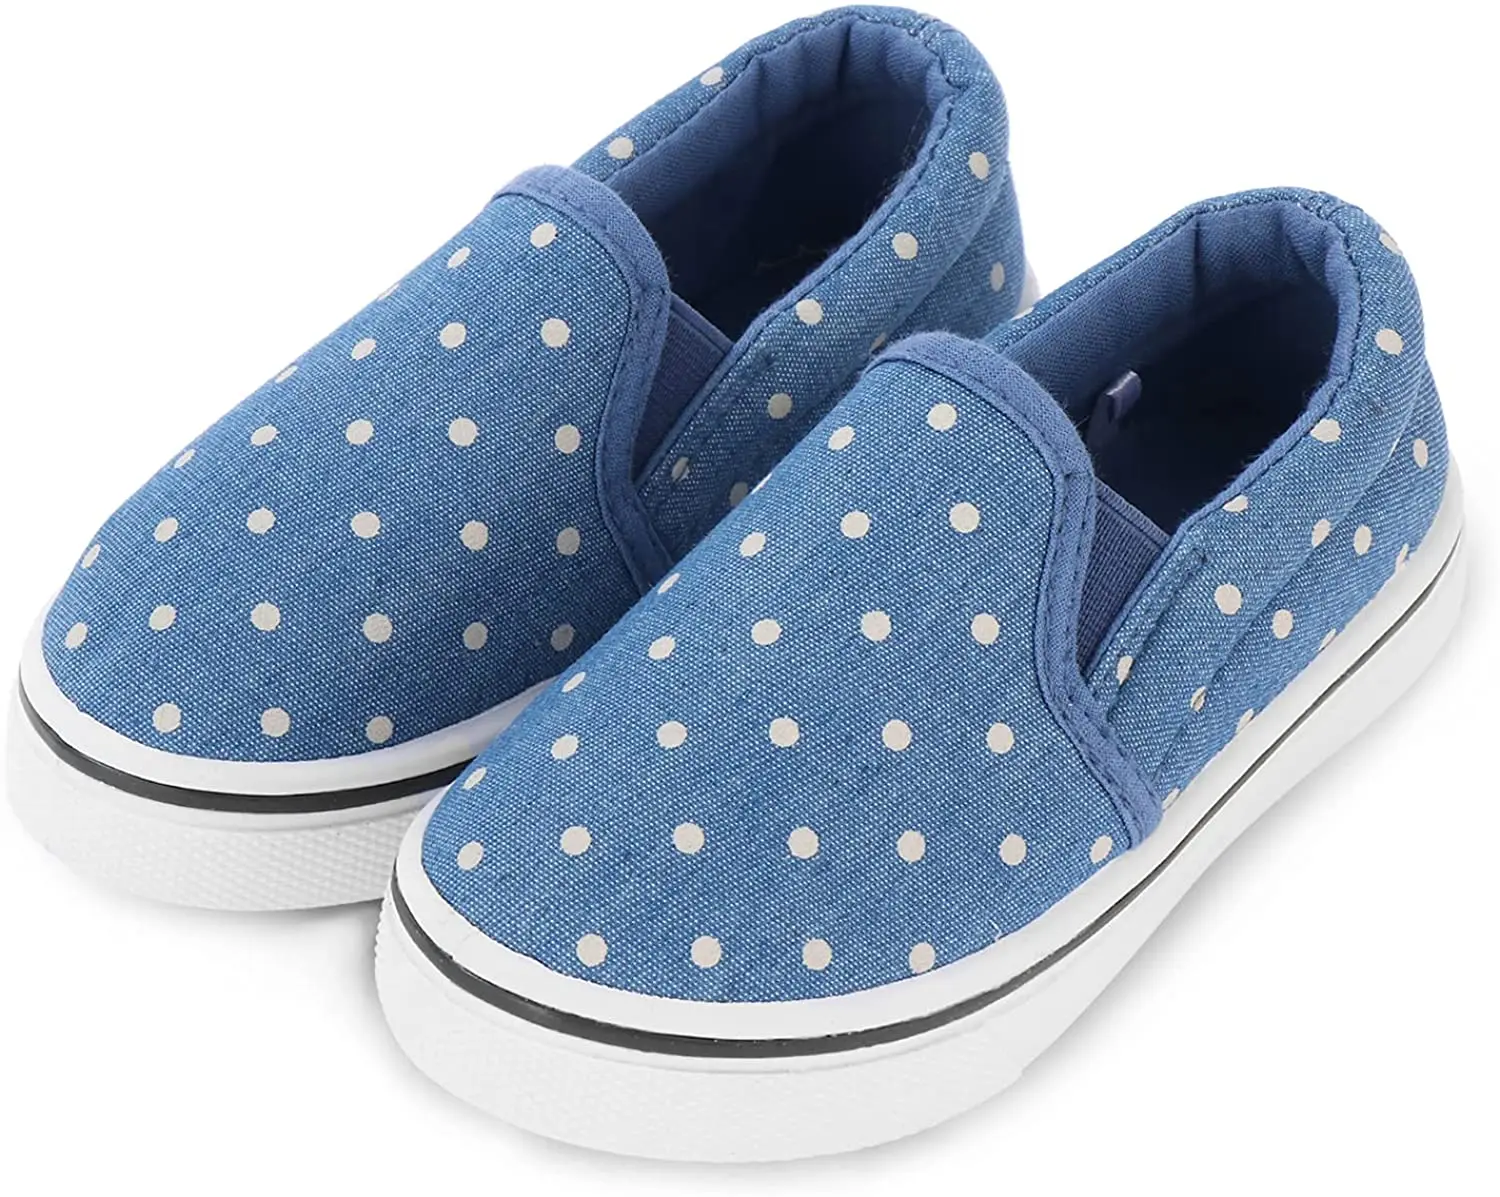 2022 High Quality Kids Shoes for Girls Boys Fashion Casual Toddler Canvas Sneakers